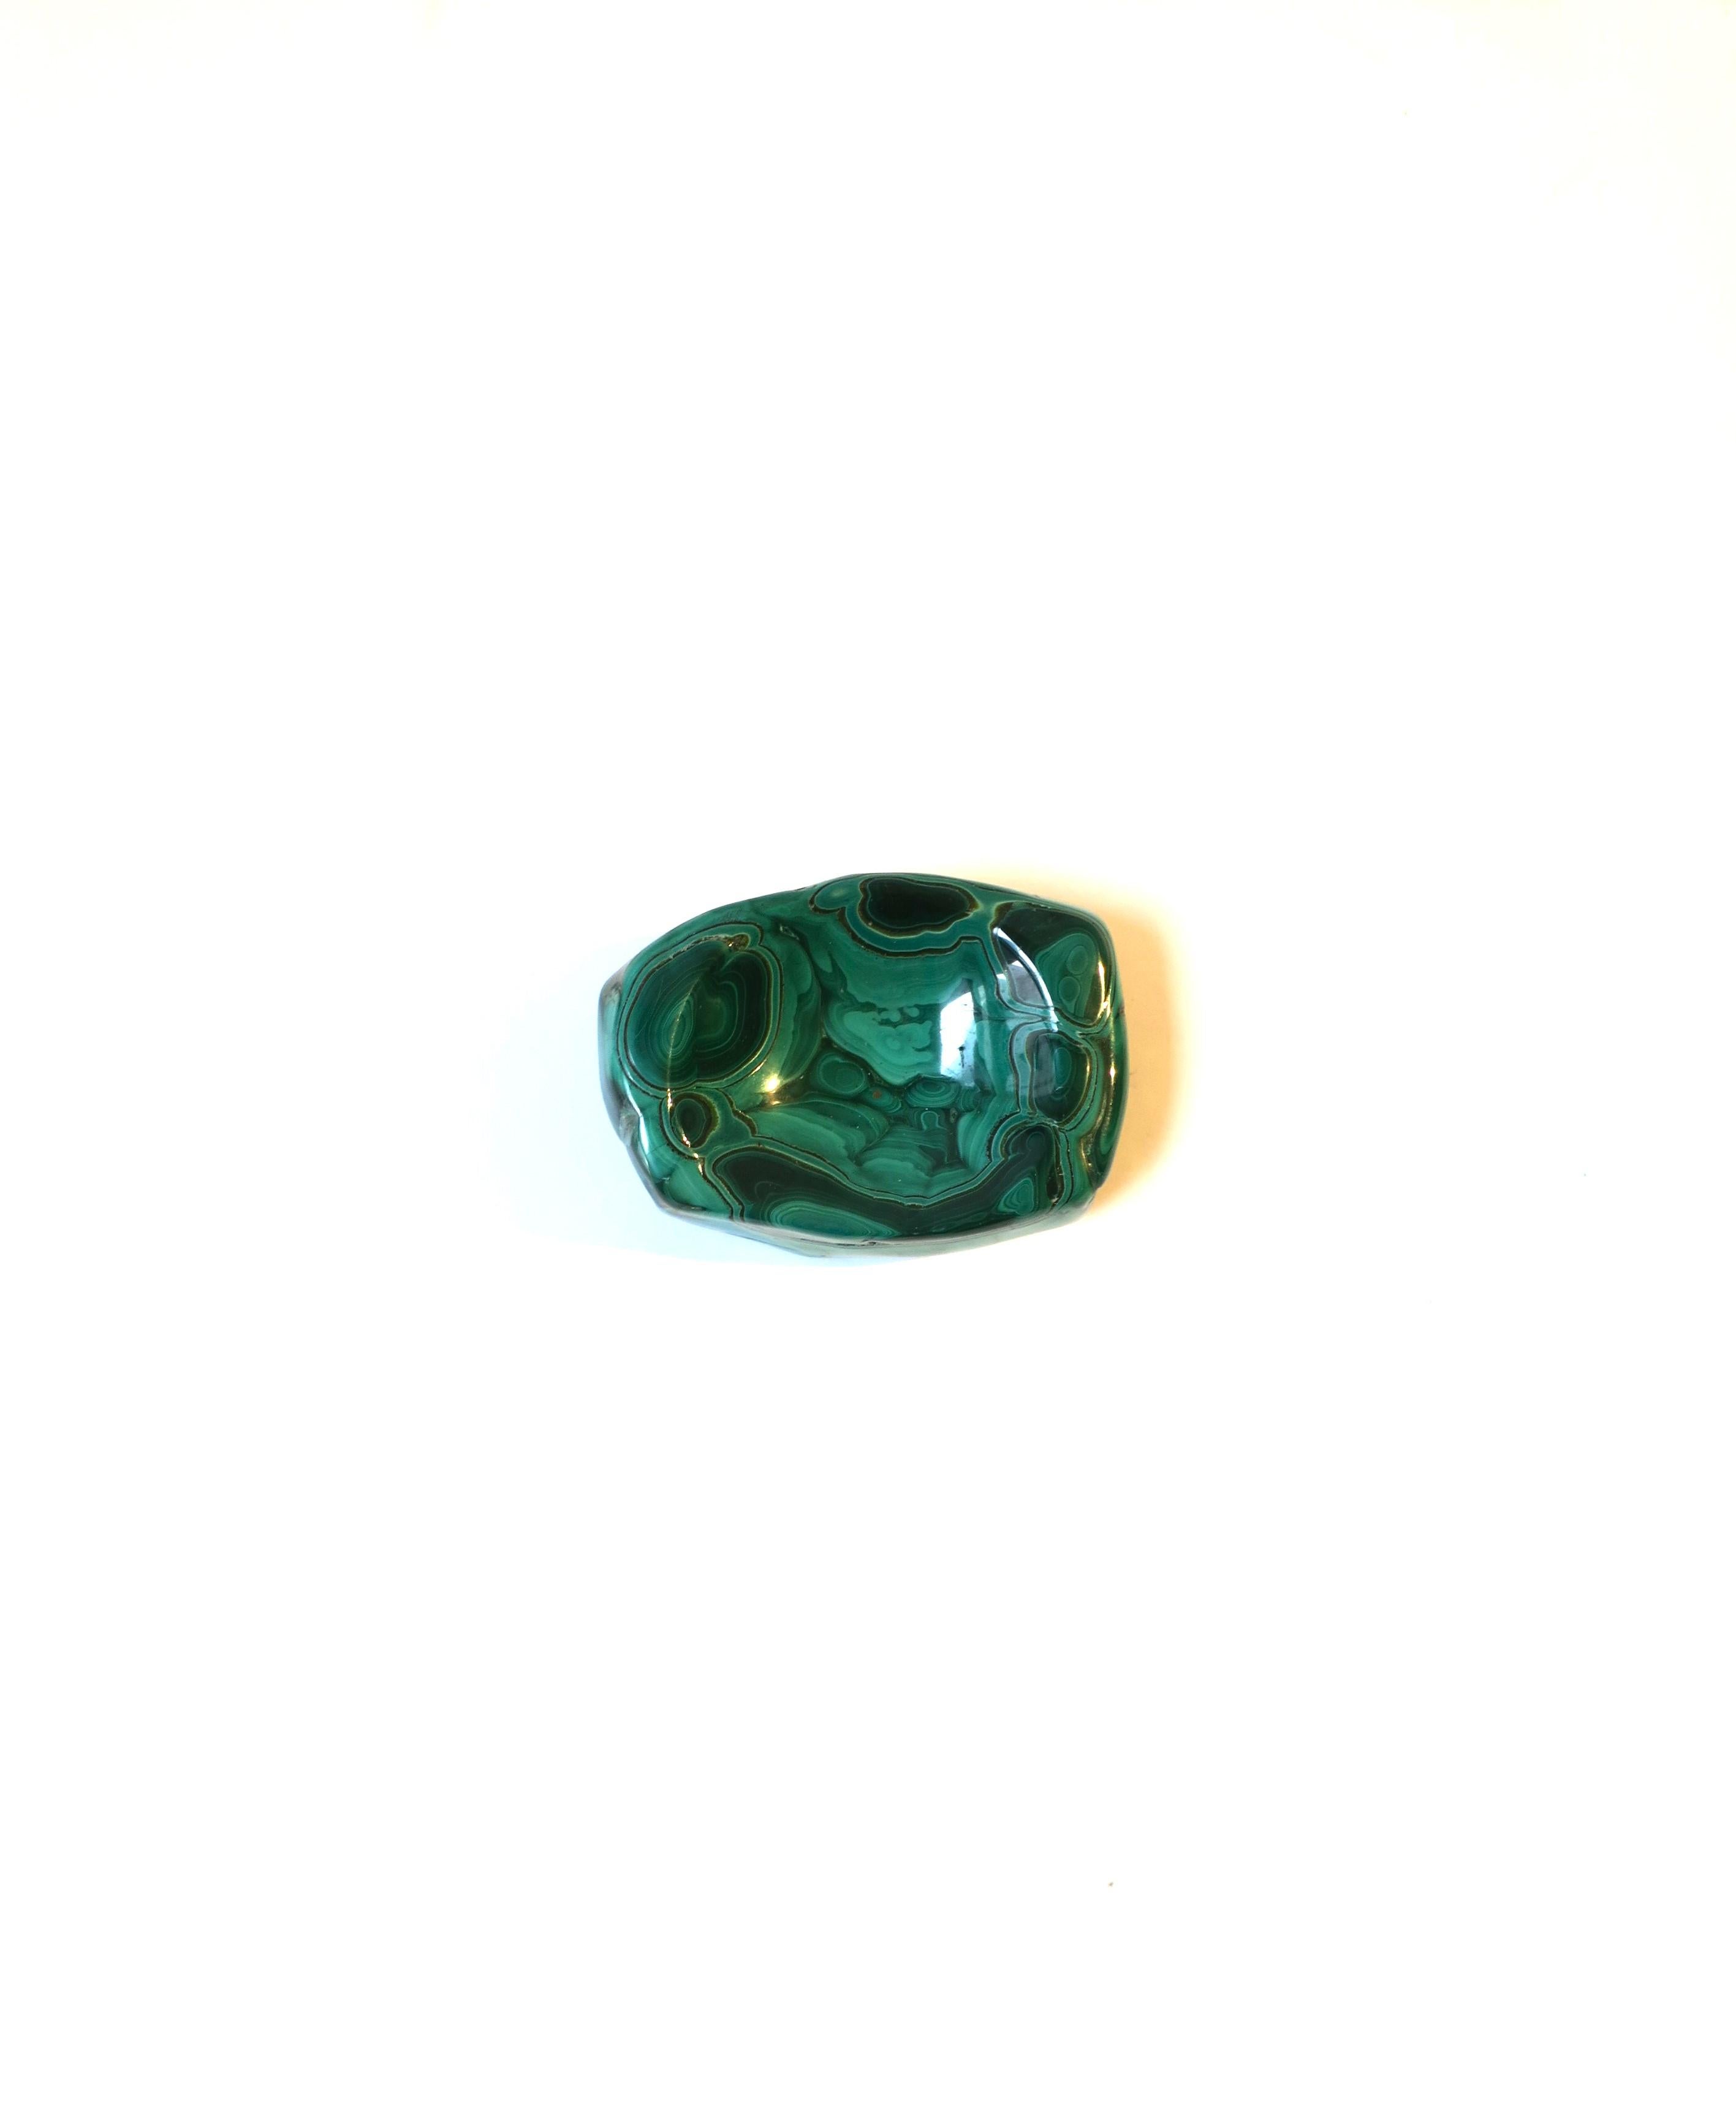 A beautiful natural emerald green malachite jewelry dish vide-poche, in the organic modern style. A great piece for a desk, vanity, nightstand table, or other area to hold small items. Shown holding earrings. A beautiful malachite vessel, polished